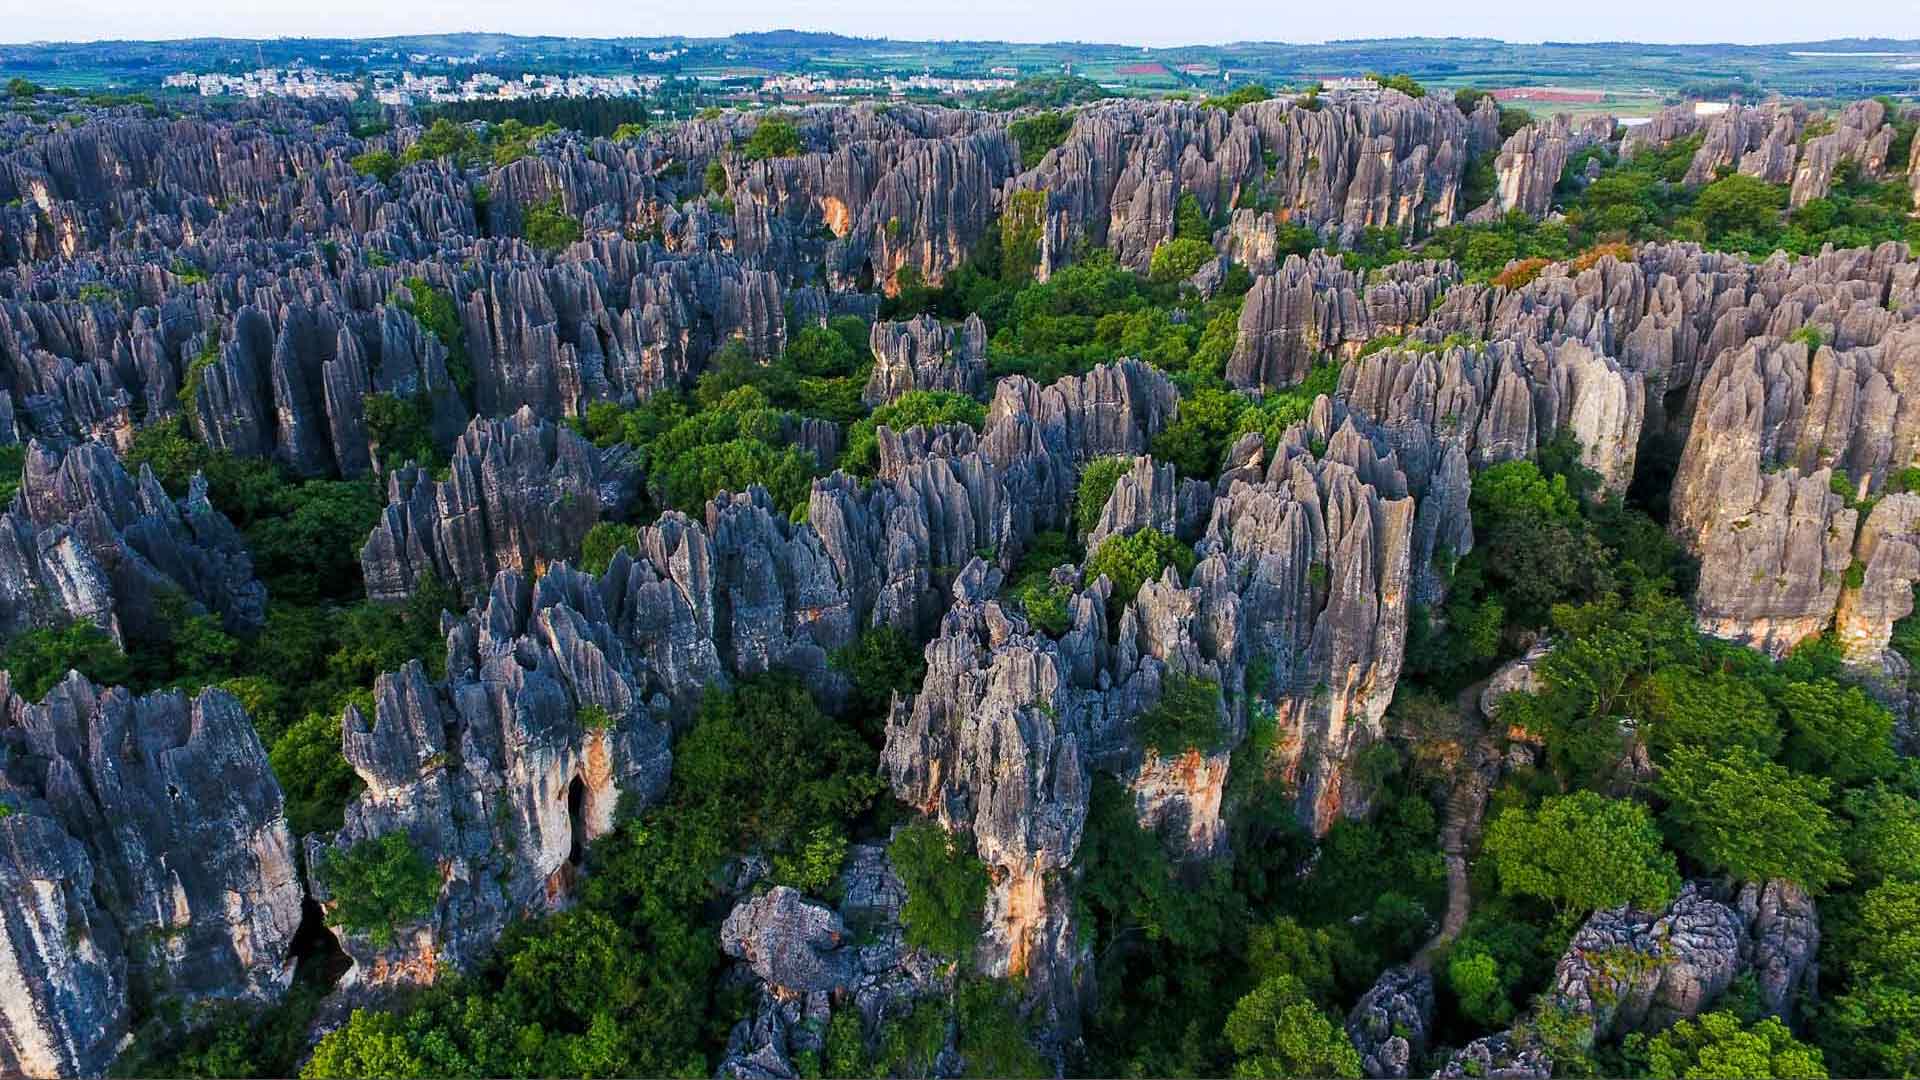 20 Mind-Blowing Facts About Karst - Facts.net